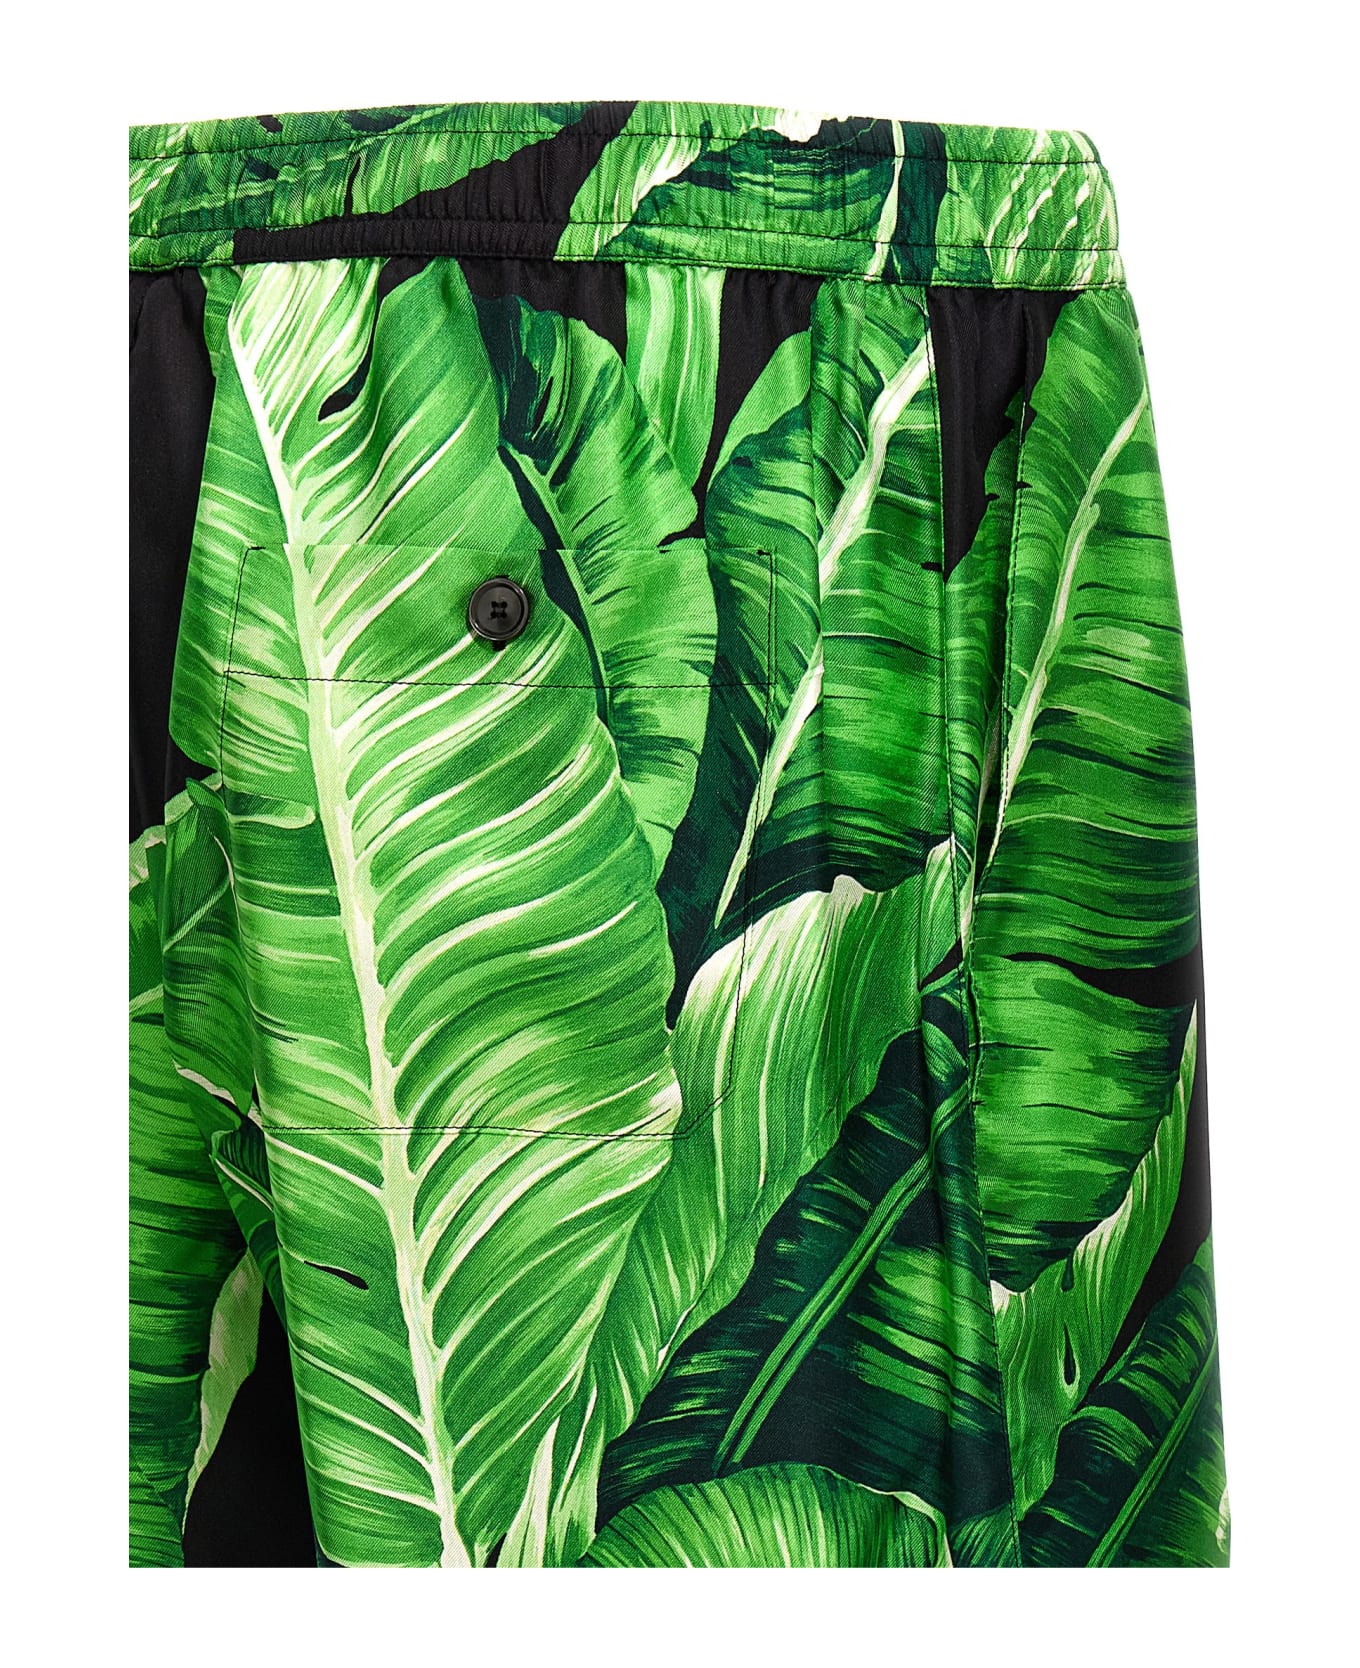 Dolce & Gabbana Bermuda Shorts With All-over Leaf Print - Green ショートパンツ